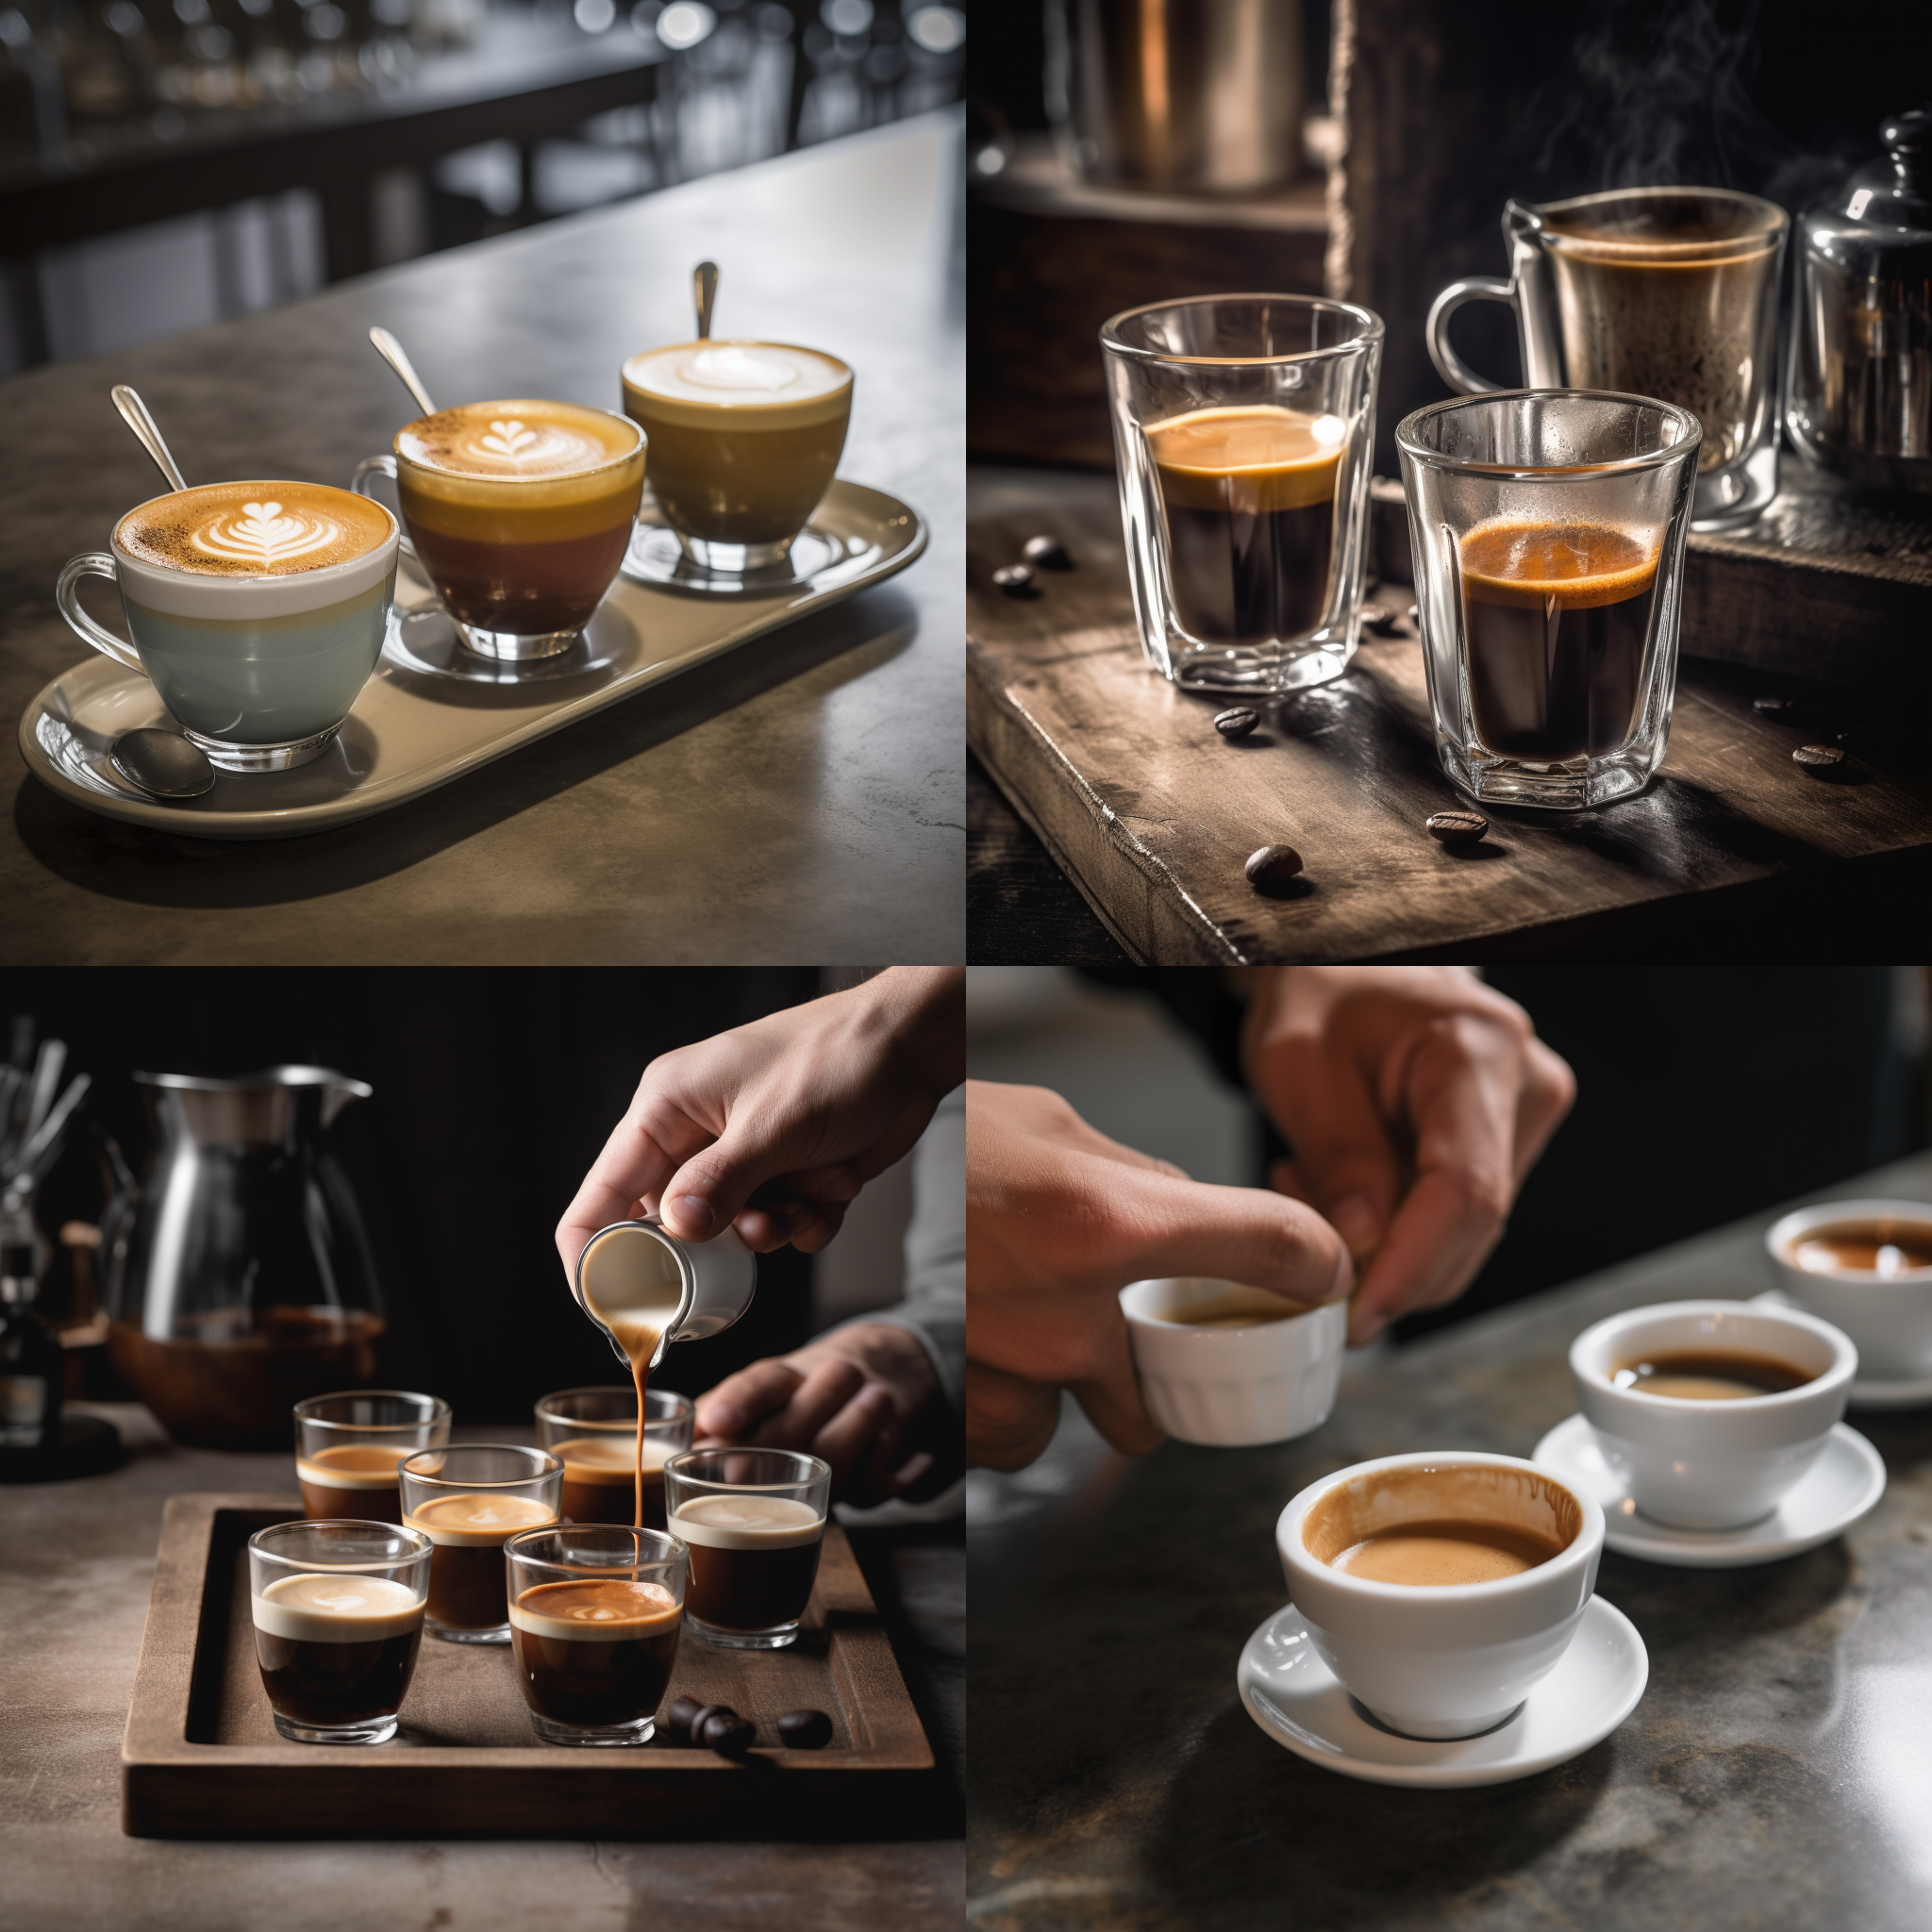 The Social Bond: Coffee Culture and the Power of Connection